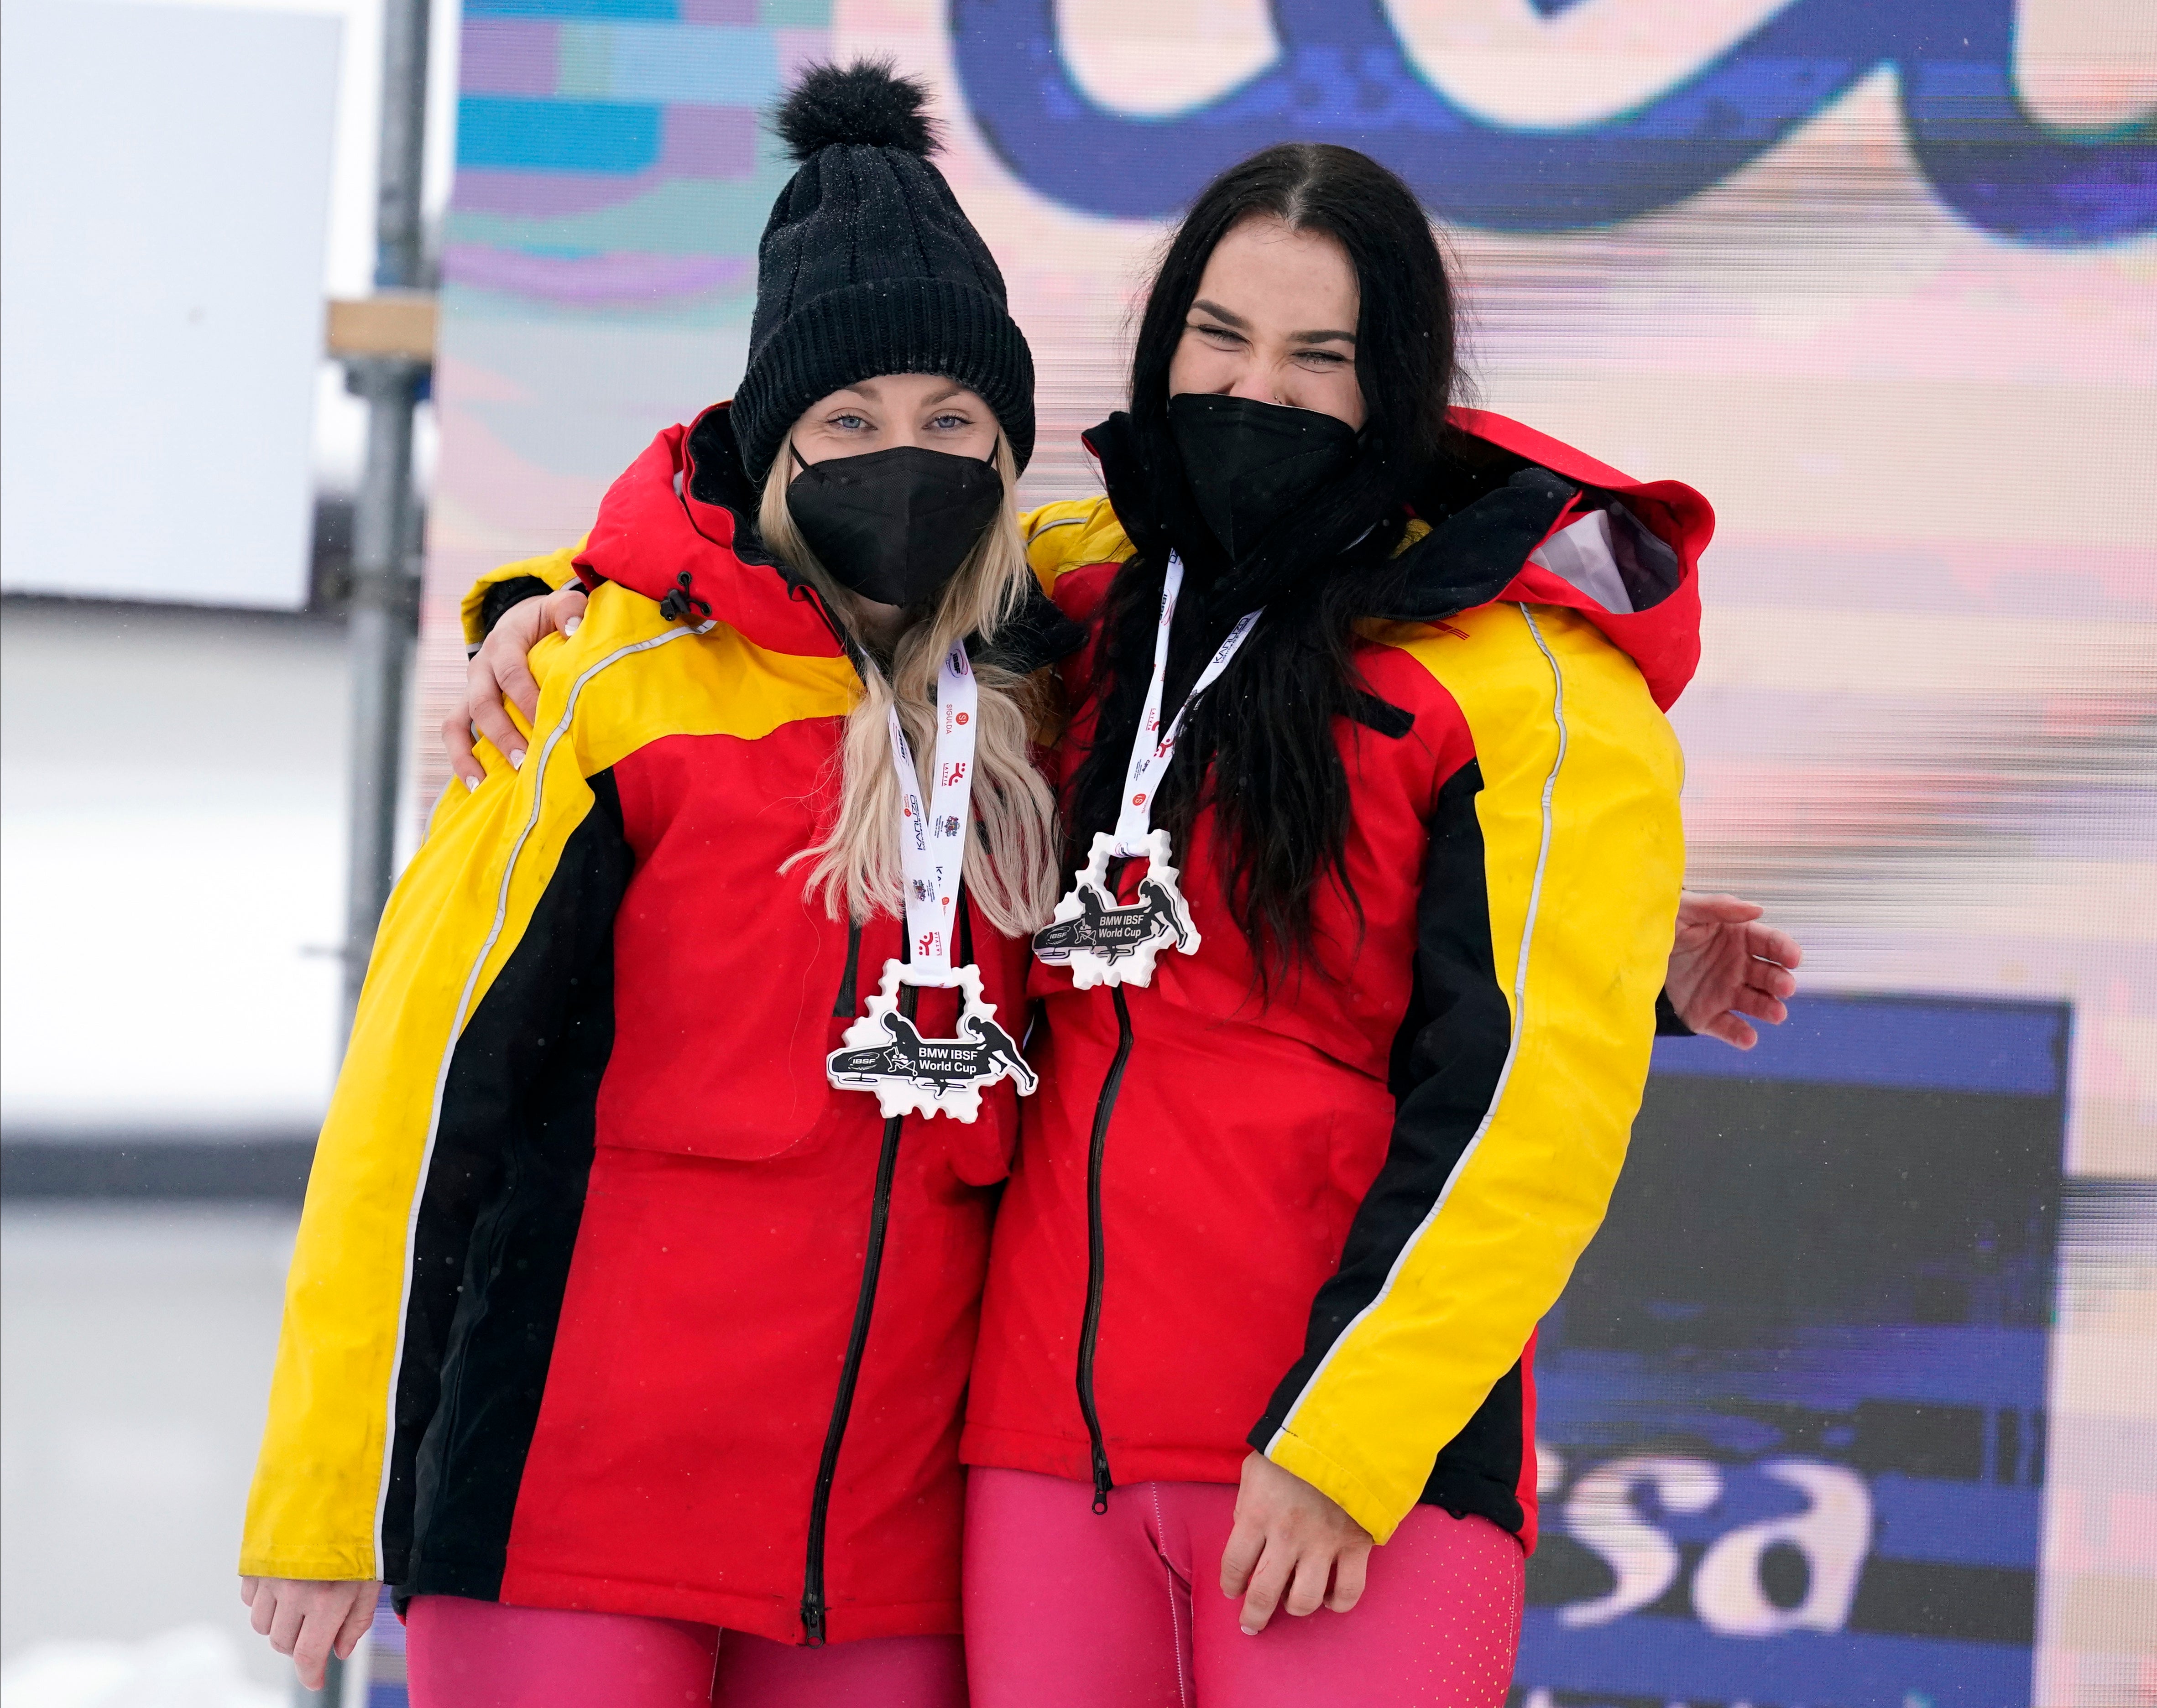 Mica McNeill (left) and Adele Nicoll on Sunday secured Great Britain’s first women’s bobsleigh World Cup medal since 2009 with one of three silvers claimed by the team across the weekend in Sigulda, Latvia (Roman Koksarov/AP).